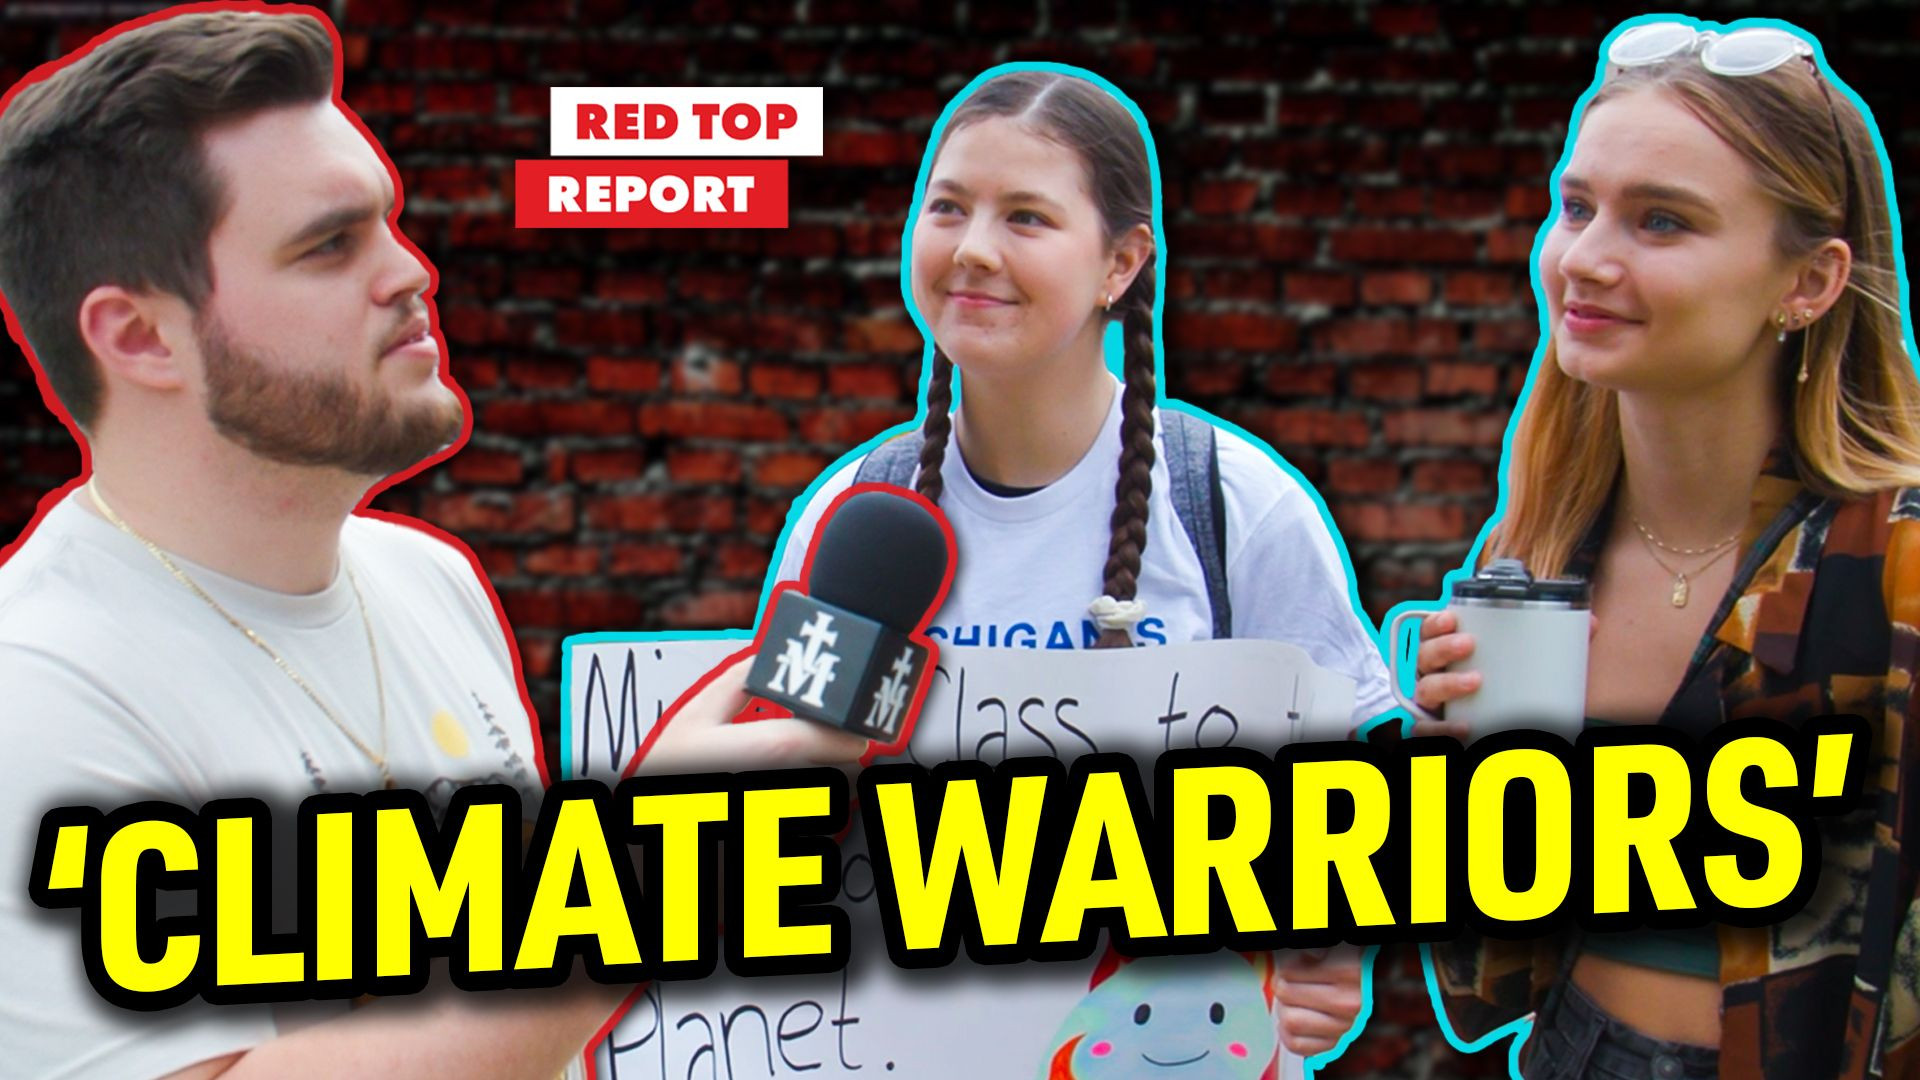 Climate Activists Challenged on Their Clean Energy Agenda